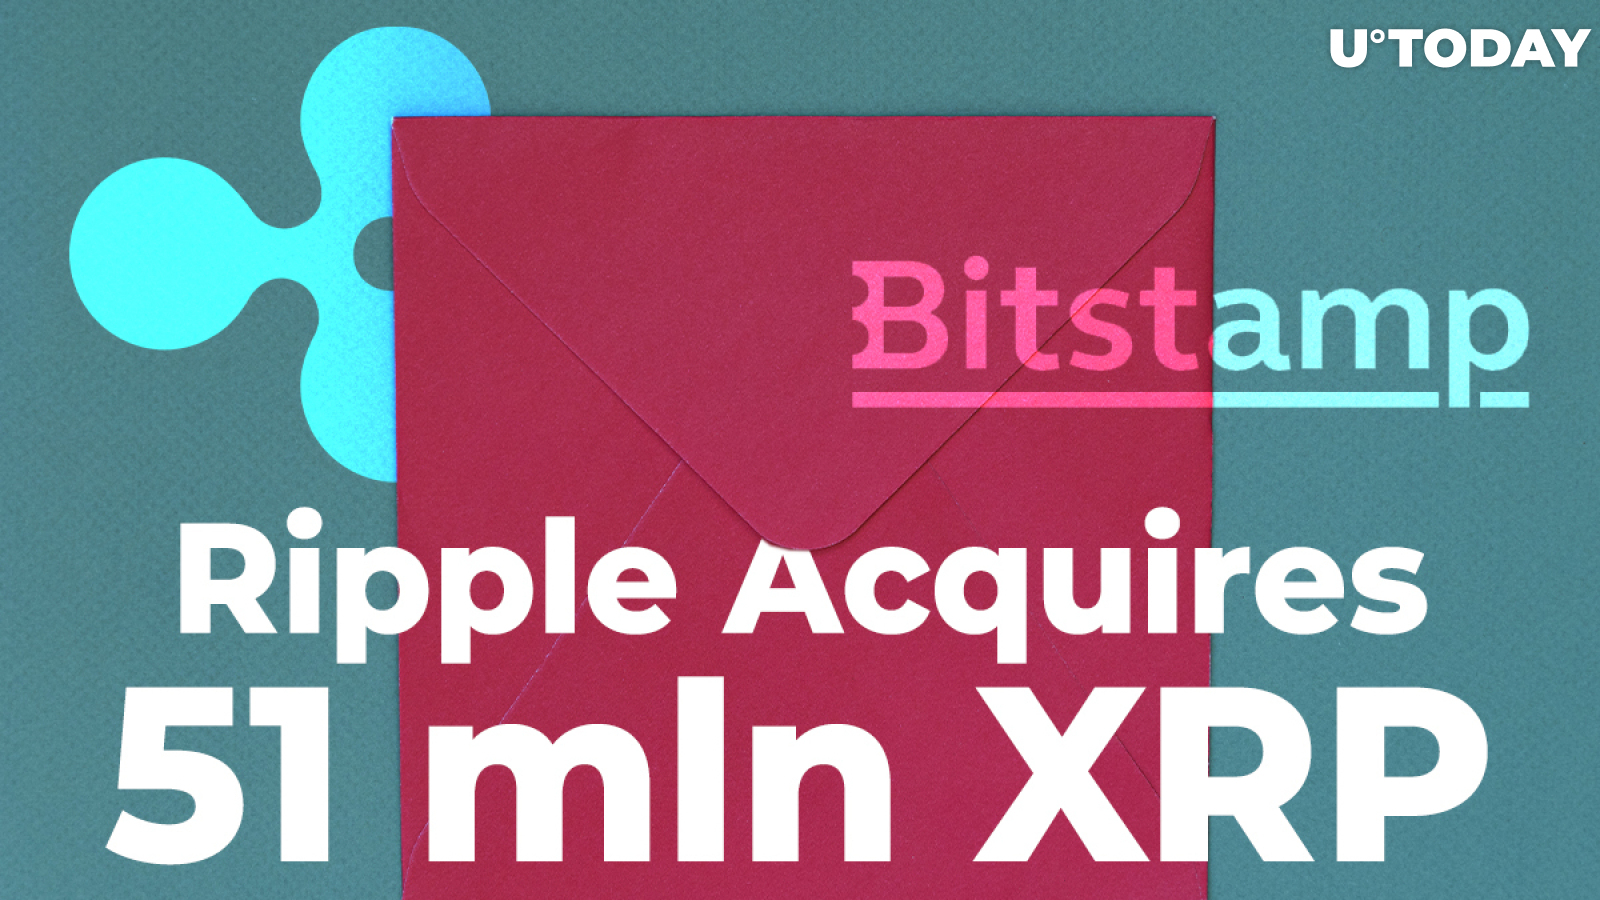 Ripple Gains 51 Mln XRP Through Bitstamp, While 65 Mln XRP Gets Shifted by Large Players